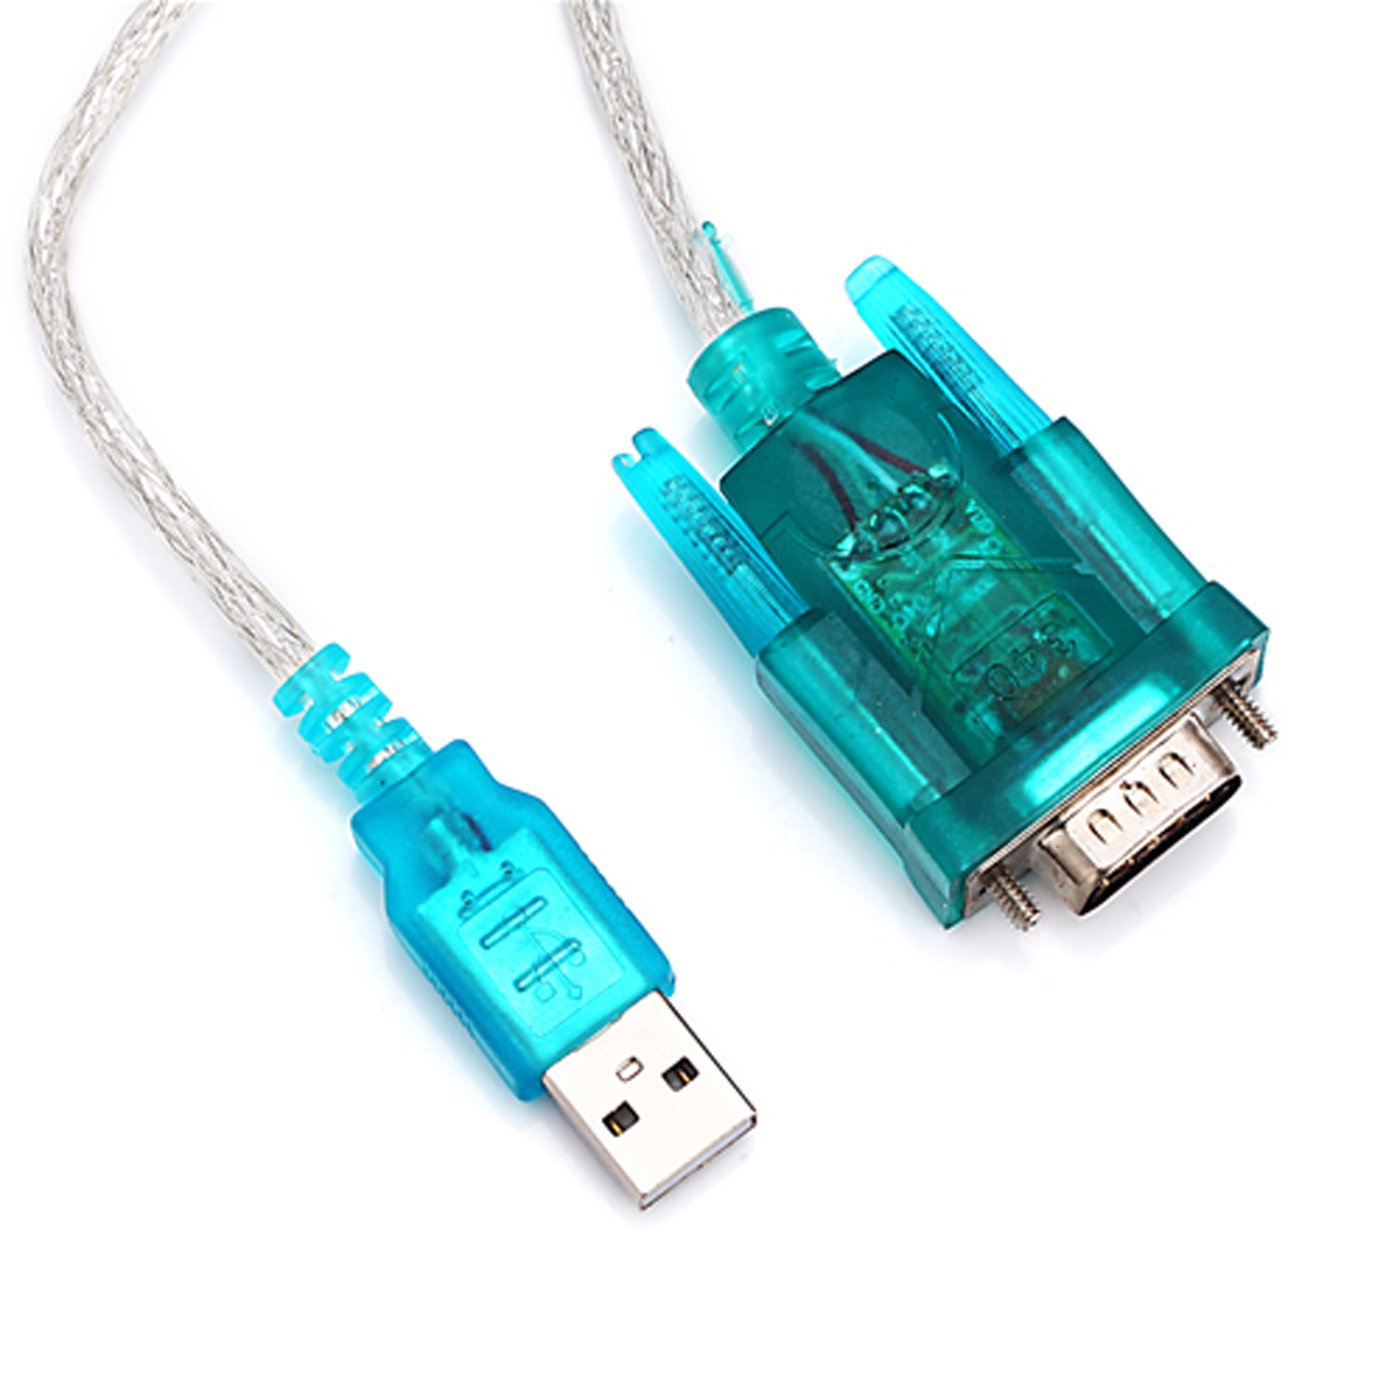 Usb cdc serial driver for mac